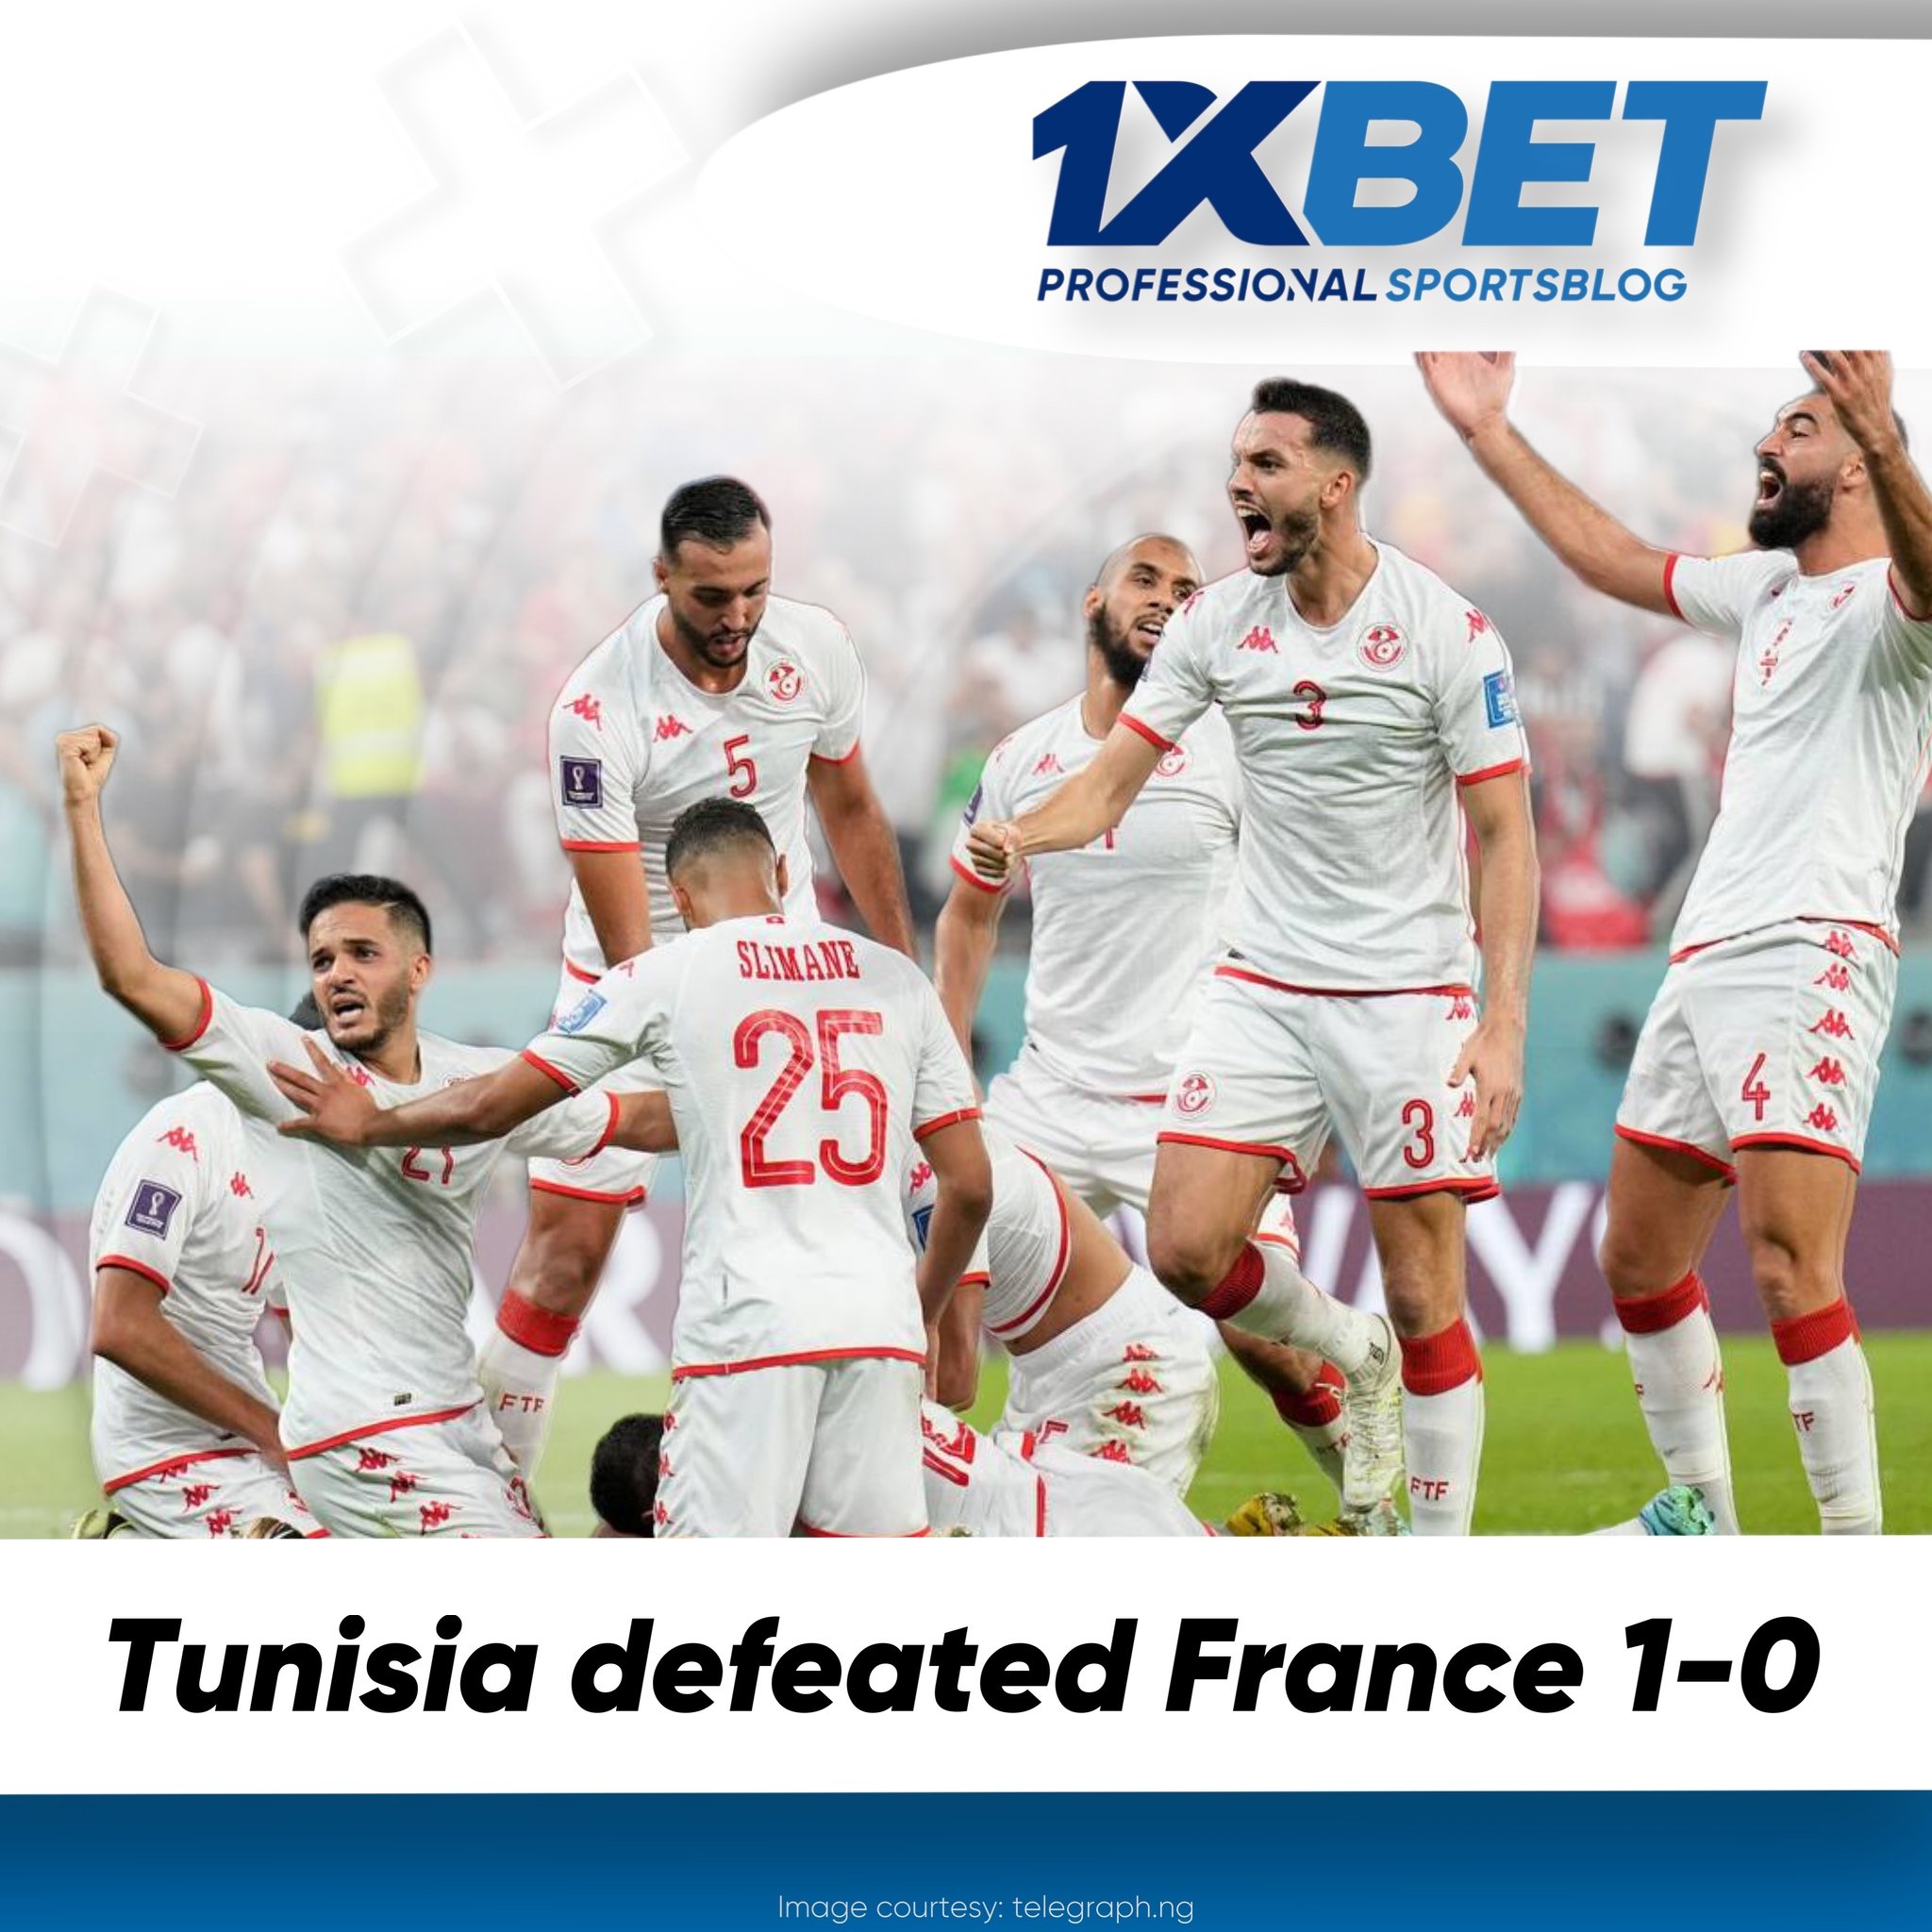 Tunisia defeated France by 1-0 points